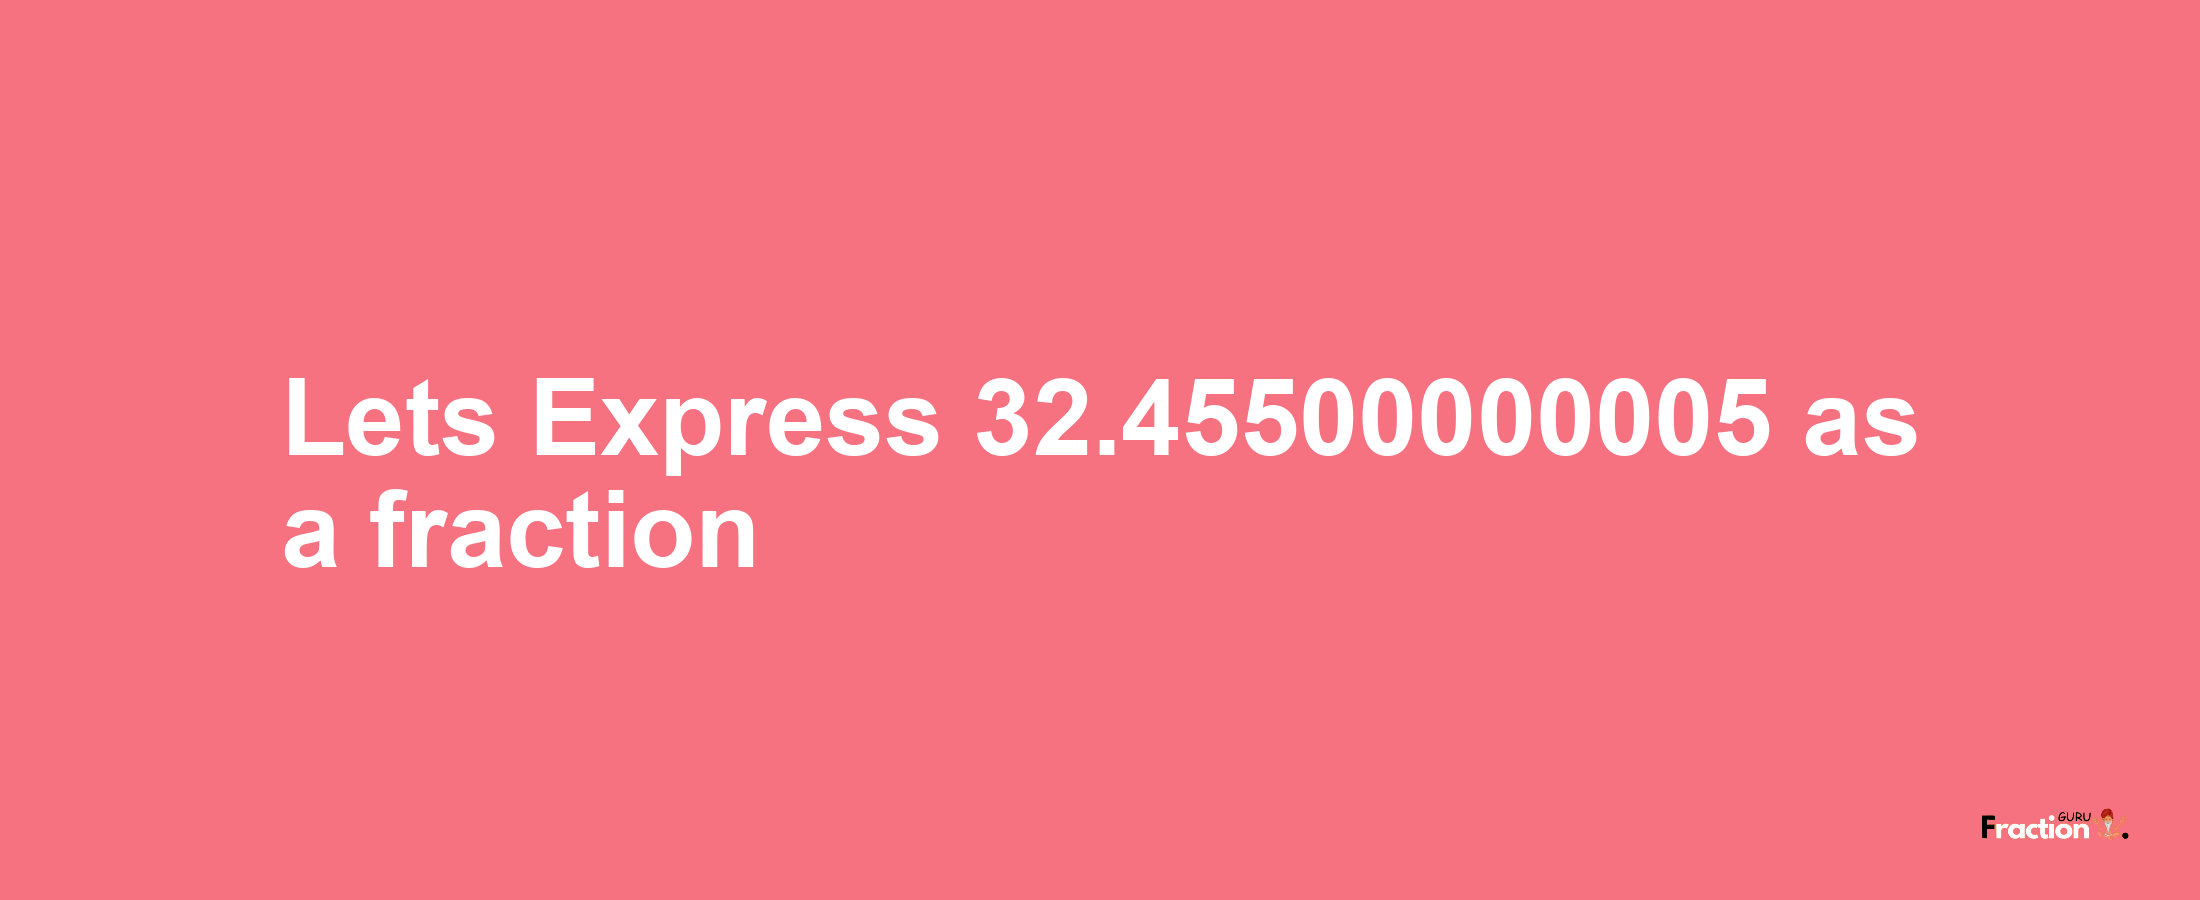 Lets Express 32.45500000005 as afraction